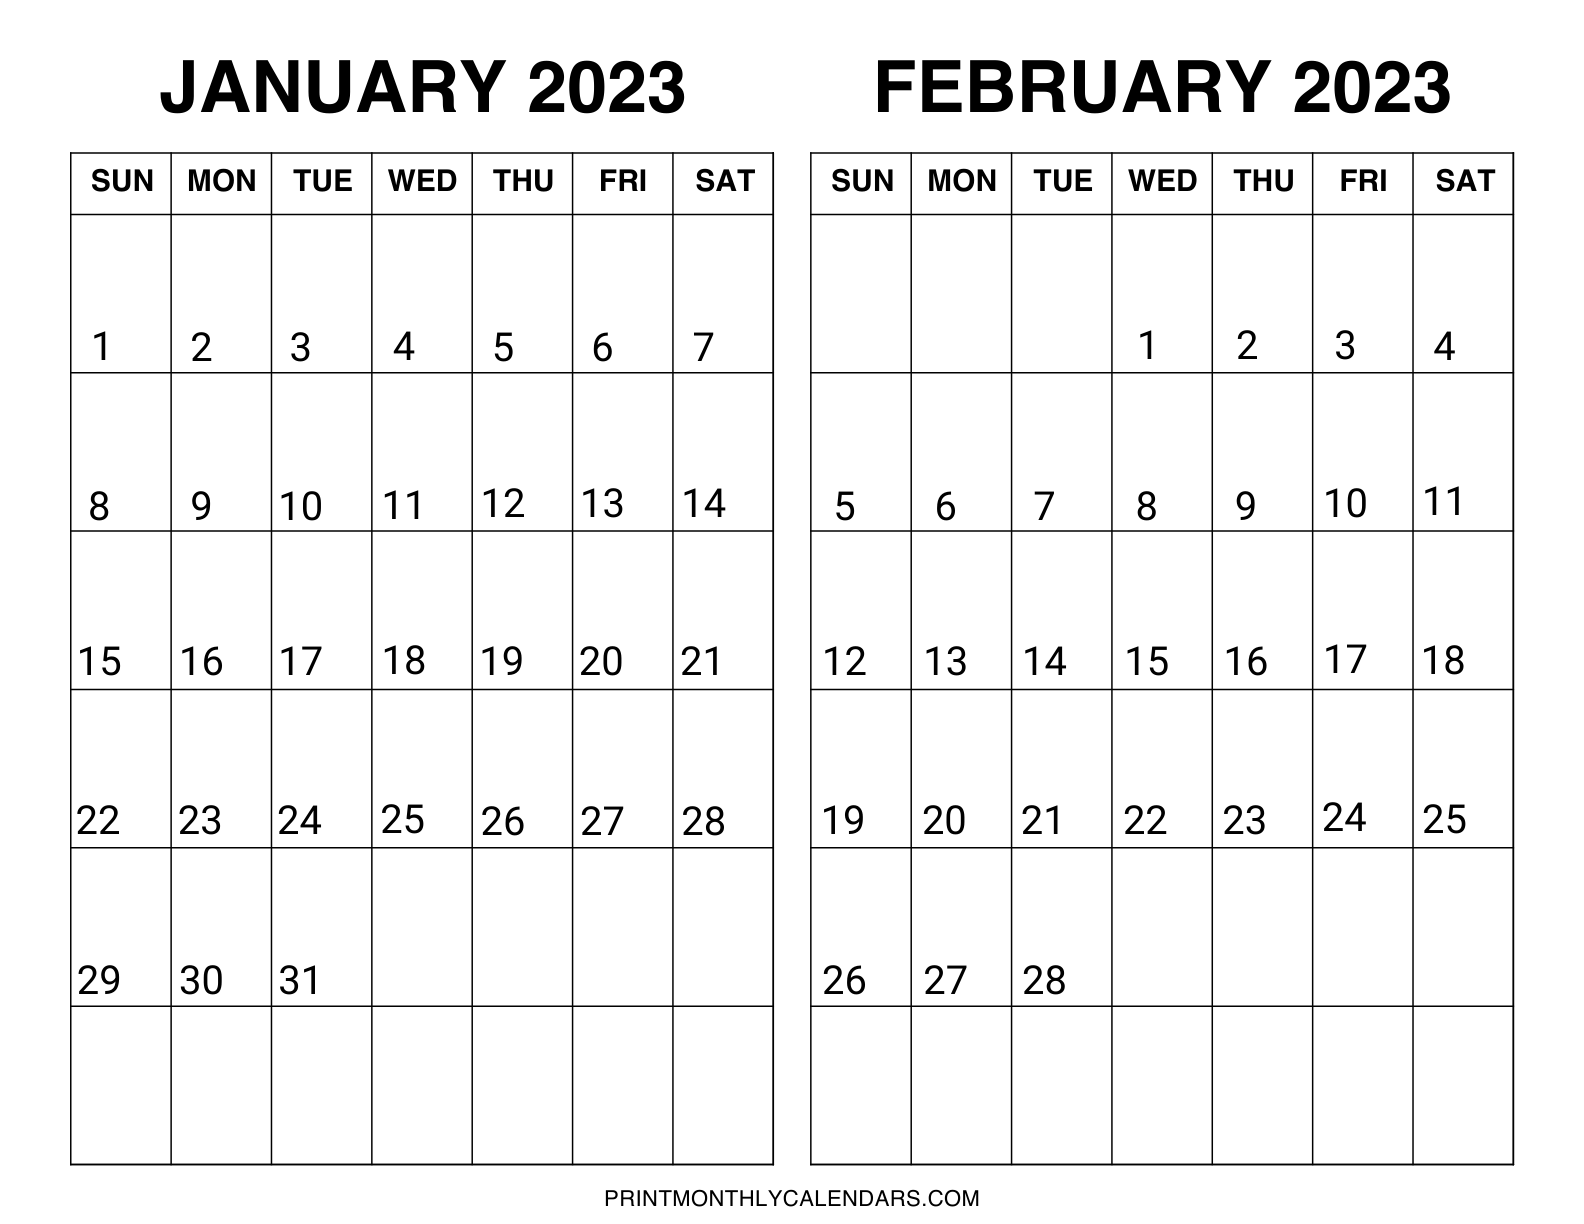 Starts on Sundays in January and February 2023. Weekdays begin on Sunday rather than Monday in this calendar template. Two month grids are organized in a horizontal layout on one page.